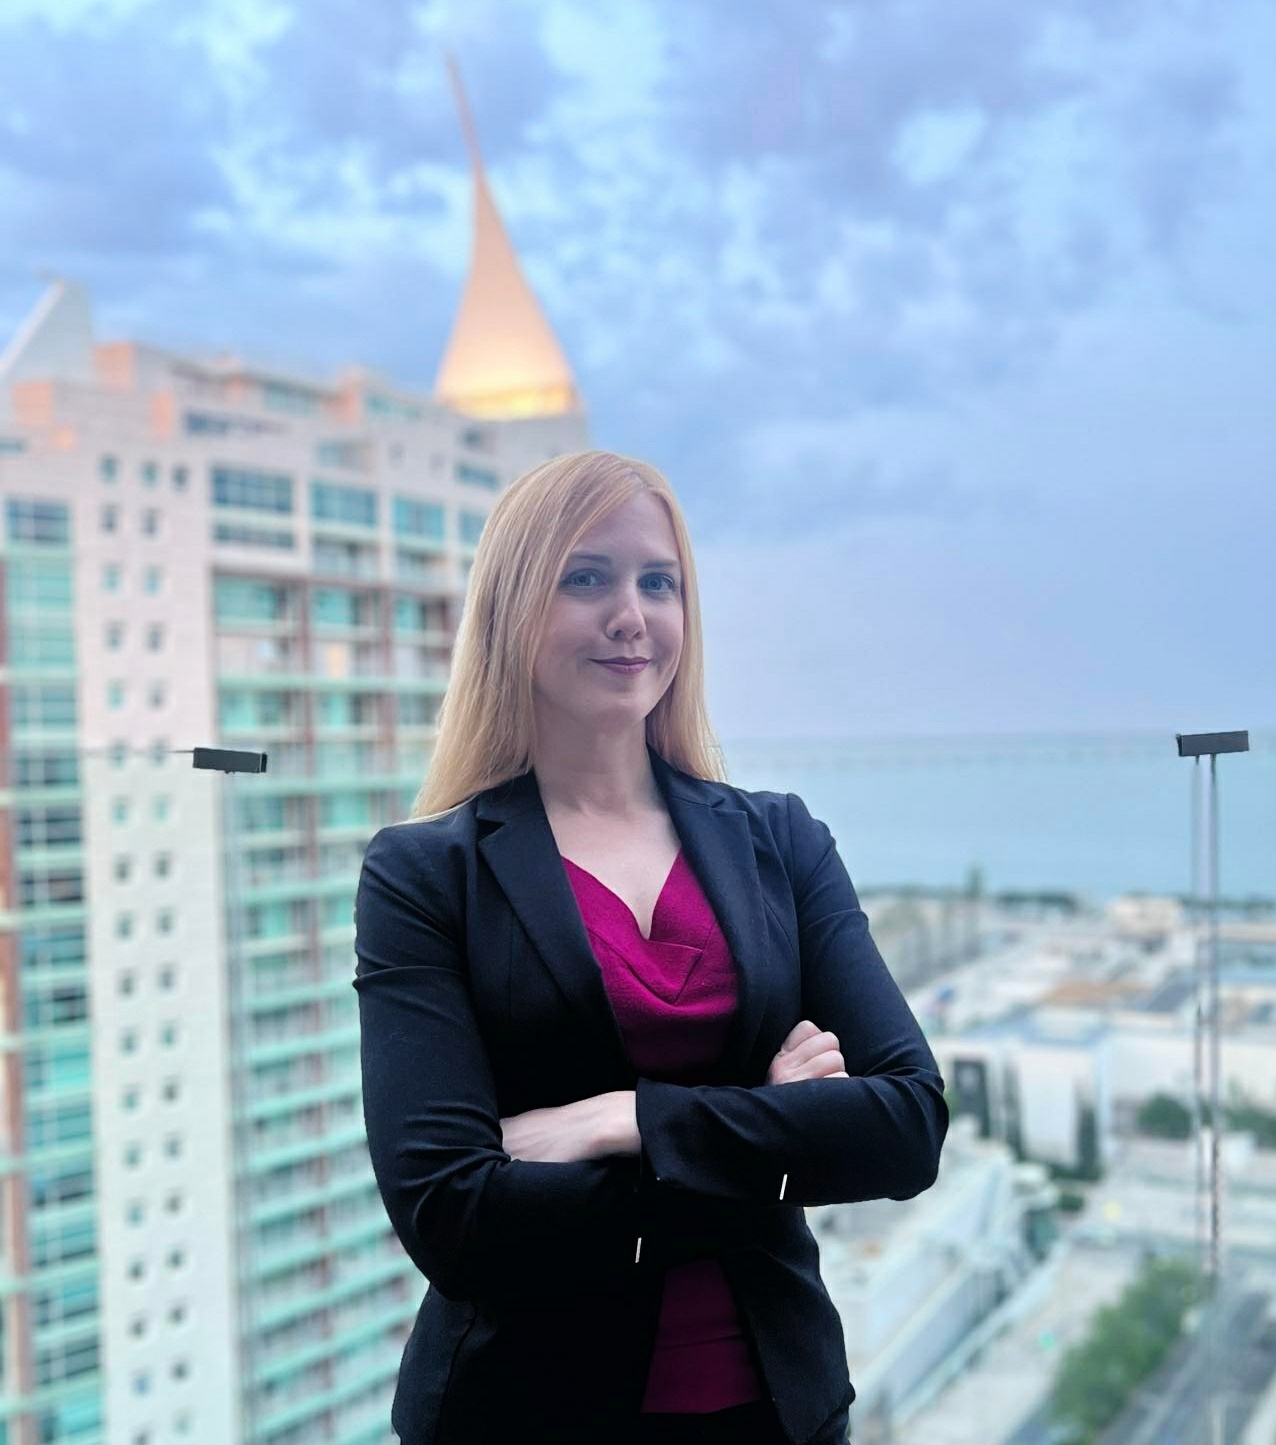 Photo of Marie Mejerwall in a suit with a tall modern building and a grey sky behind her